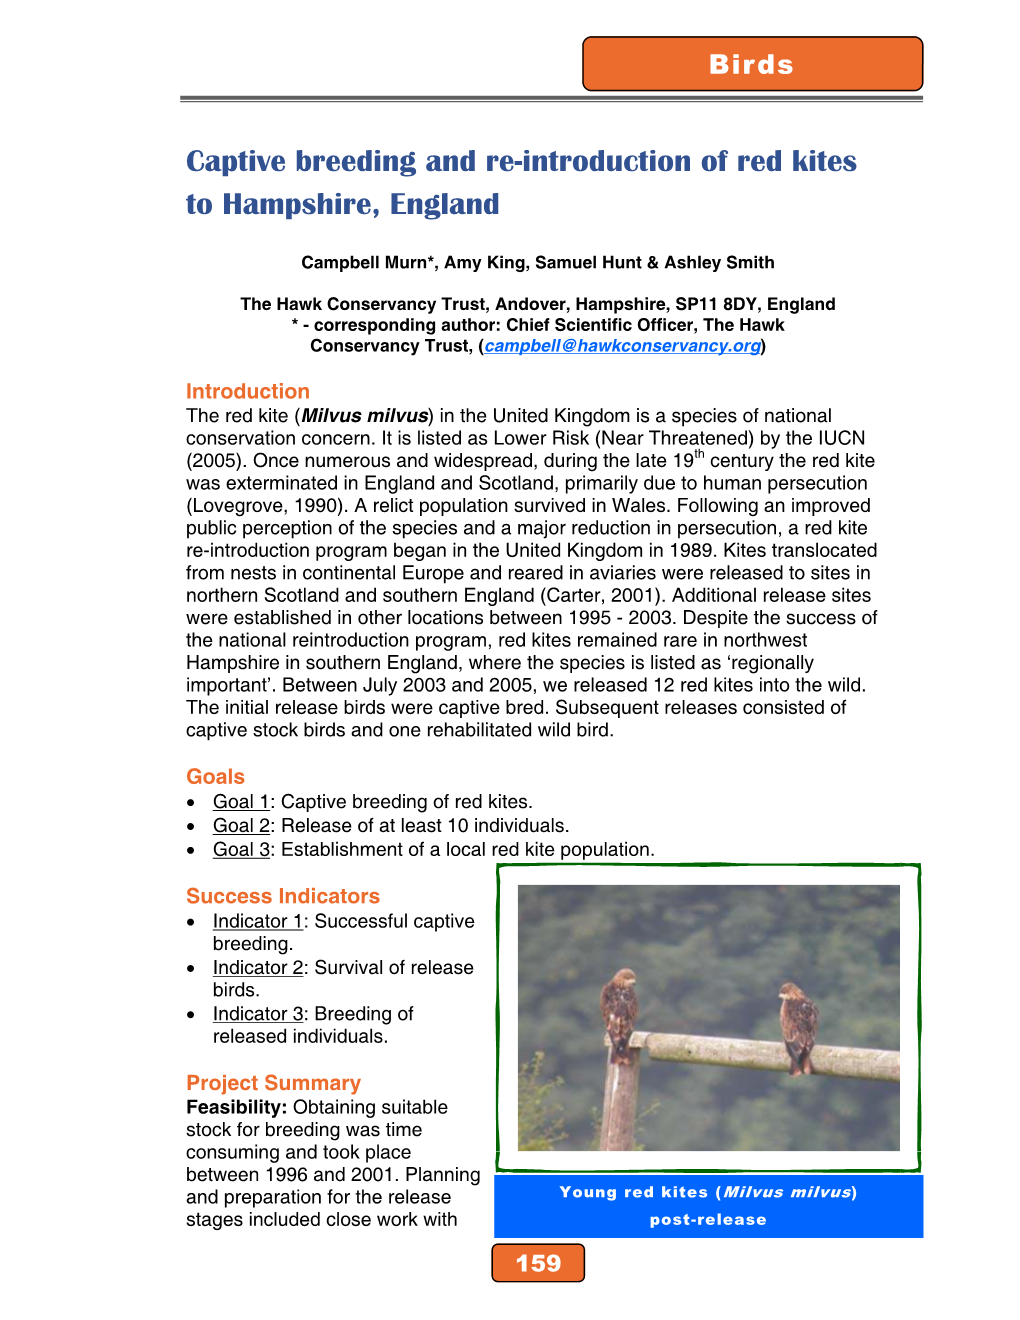 Captive Breeding and Re-Introduction of Red Kites to Hampshire, England